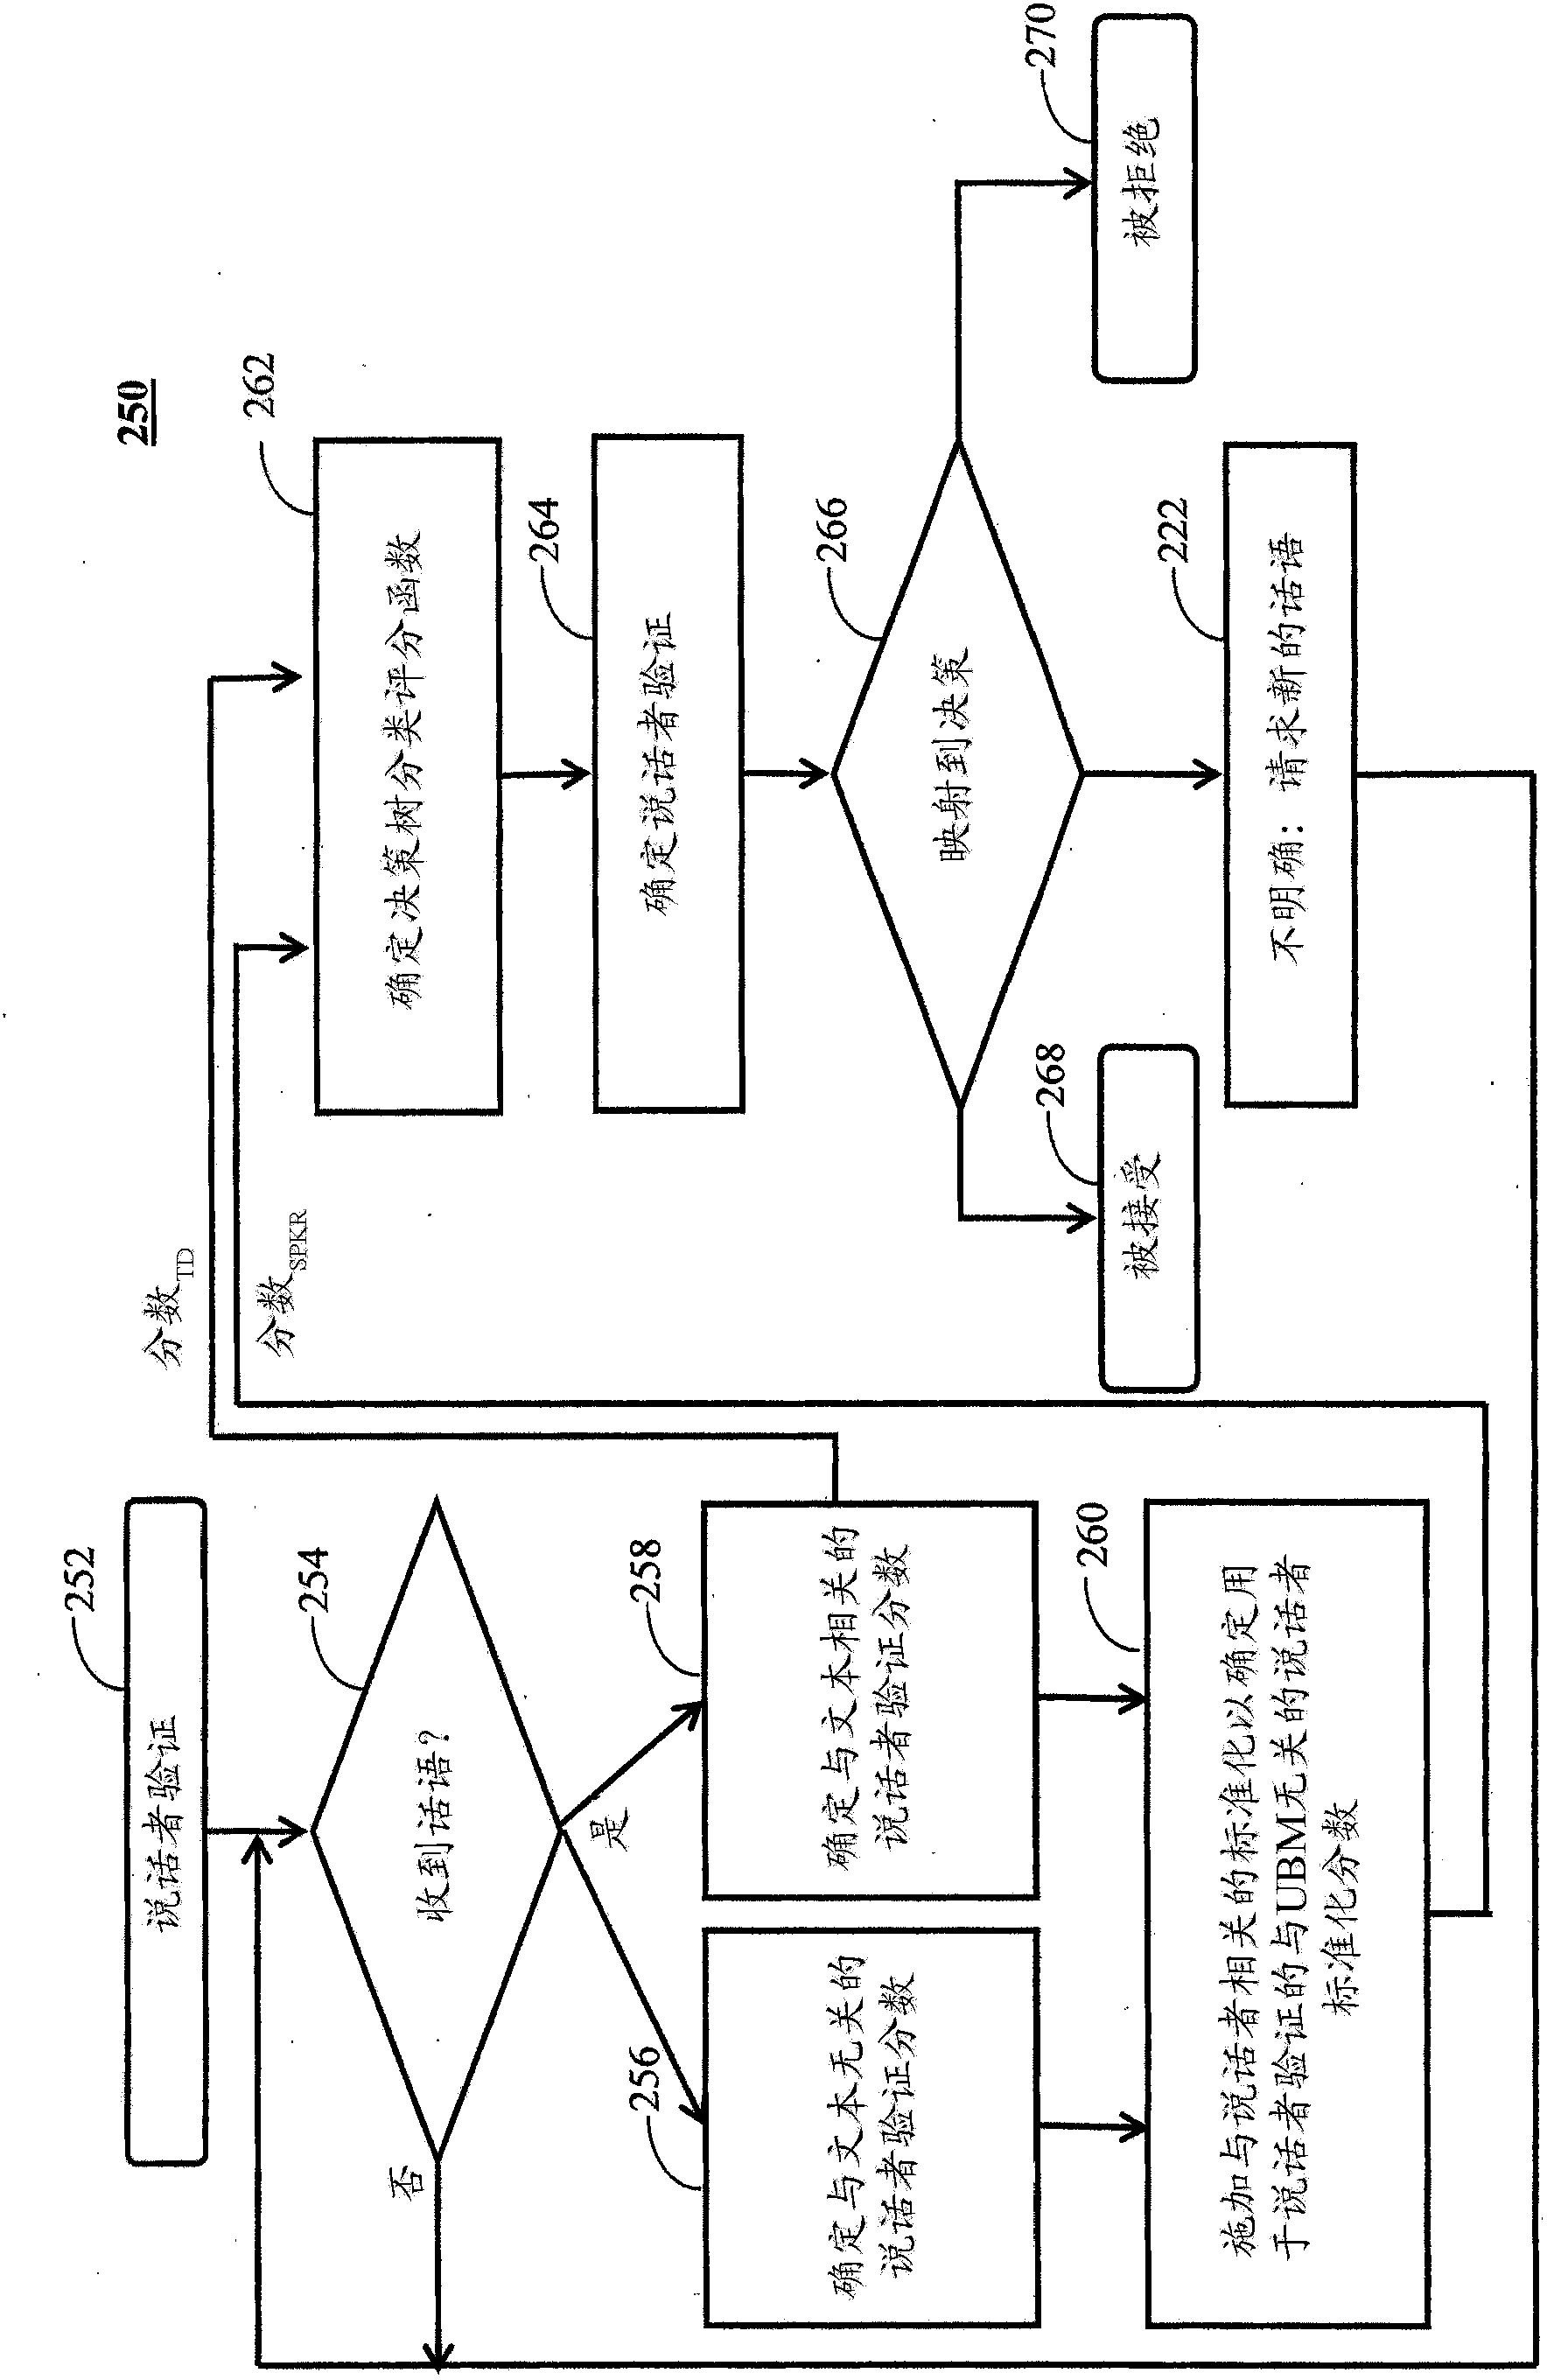 Method and system for dual scoring for text-dependent speaker verification